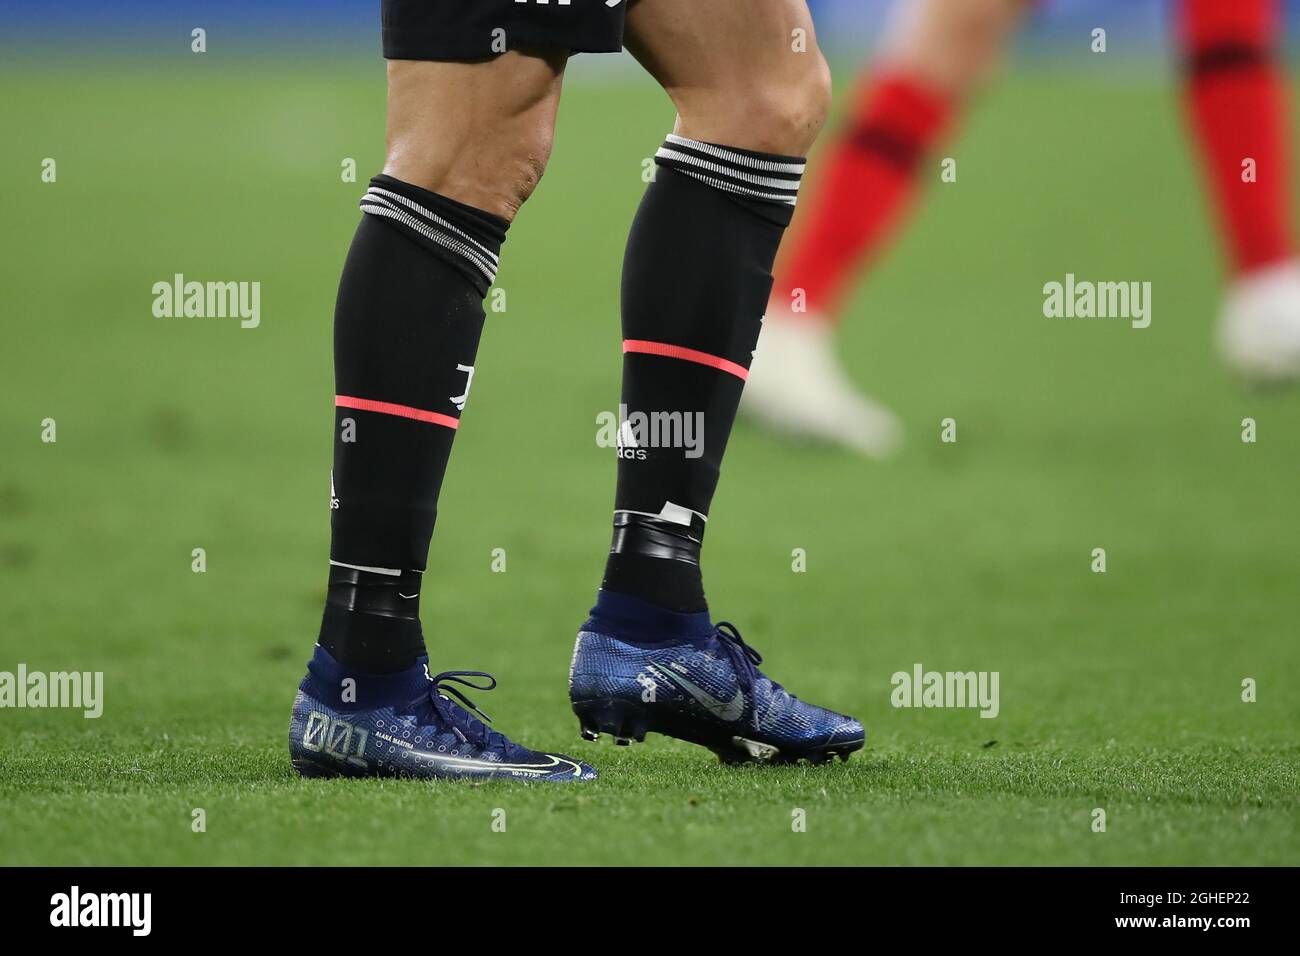 Cristiano Ronaldo of Juventus models a new version of the Nike Mercurial  football boots during the UEFA Champions League match at Juventus Stadium,  Turin. Picture date: 1st October 2019. Picture credit should